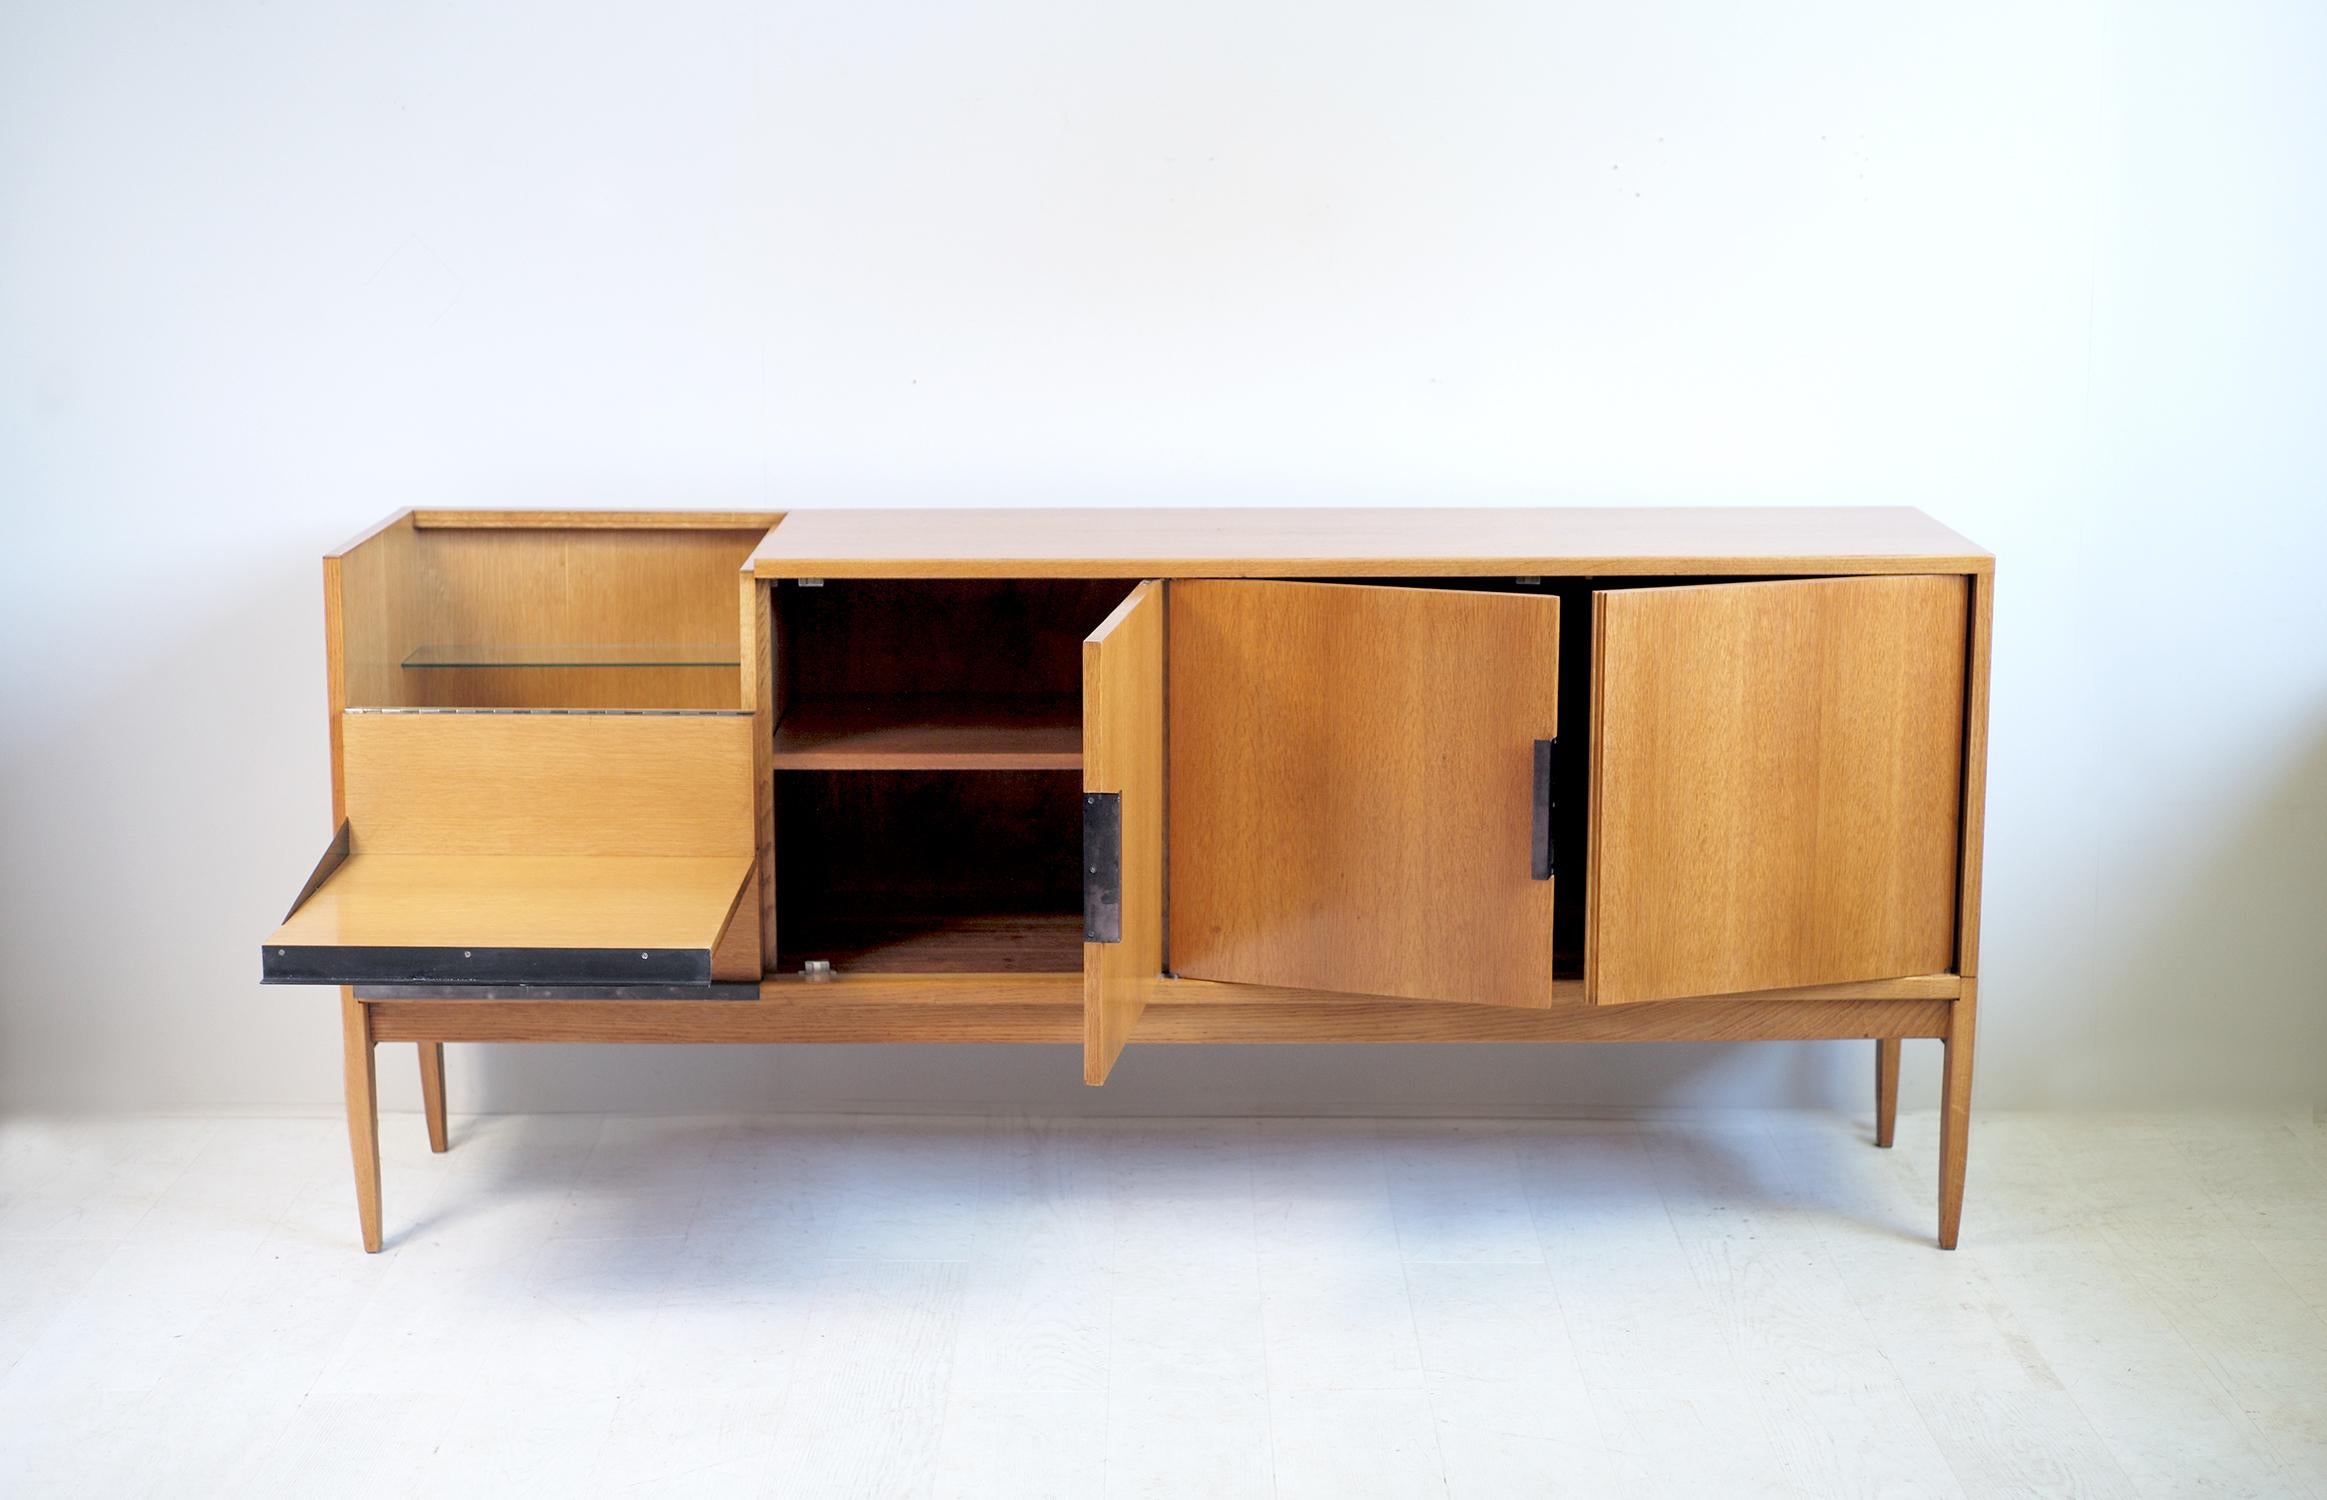 Roger Landault, Sideboard in oak, handle in blackened metal, France, 1960. The design of a beautiful sobriety combines blond oak, highlighted by handles in folded metal with gunmetal patina. The bar part opens and tilts to form a serving tray. A